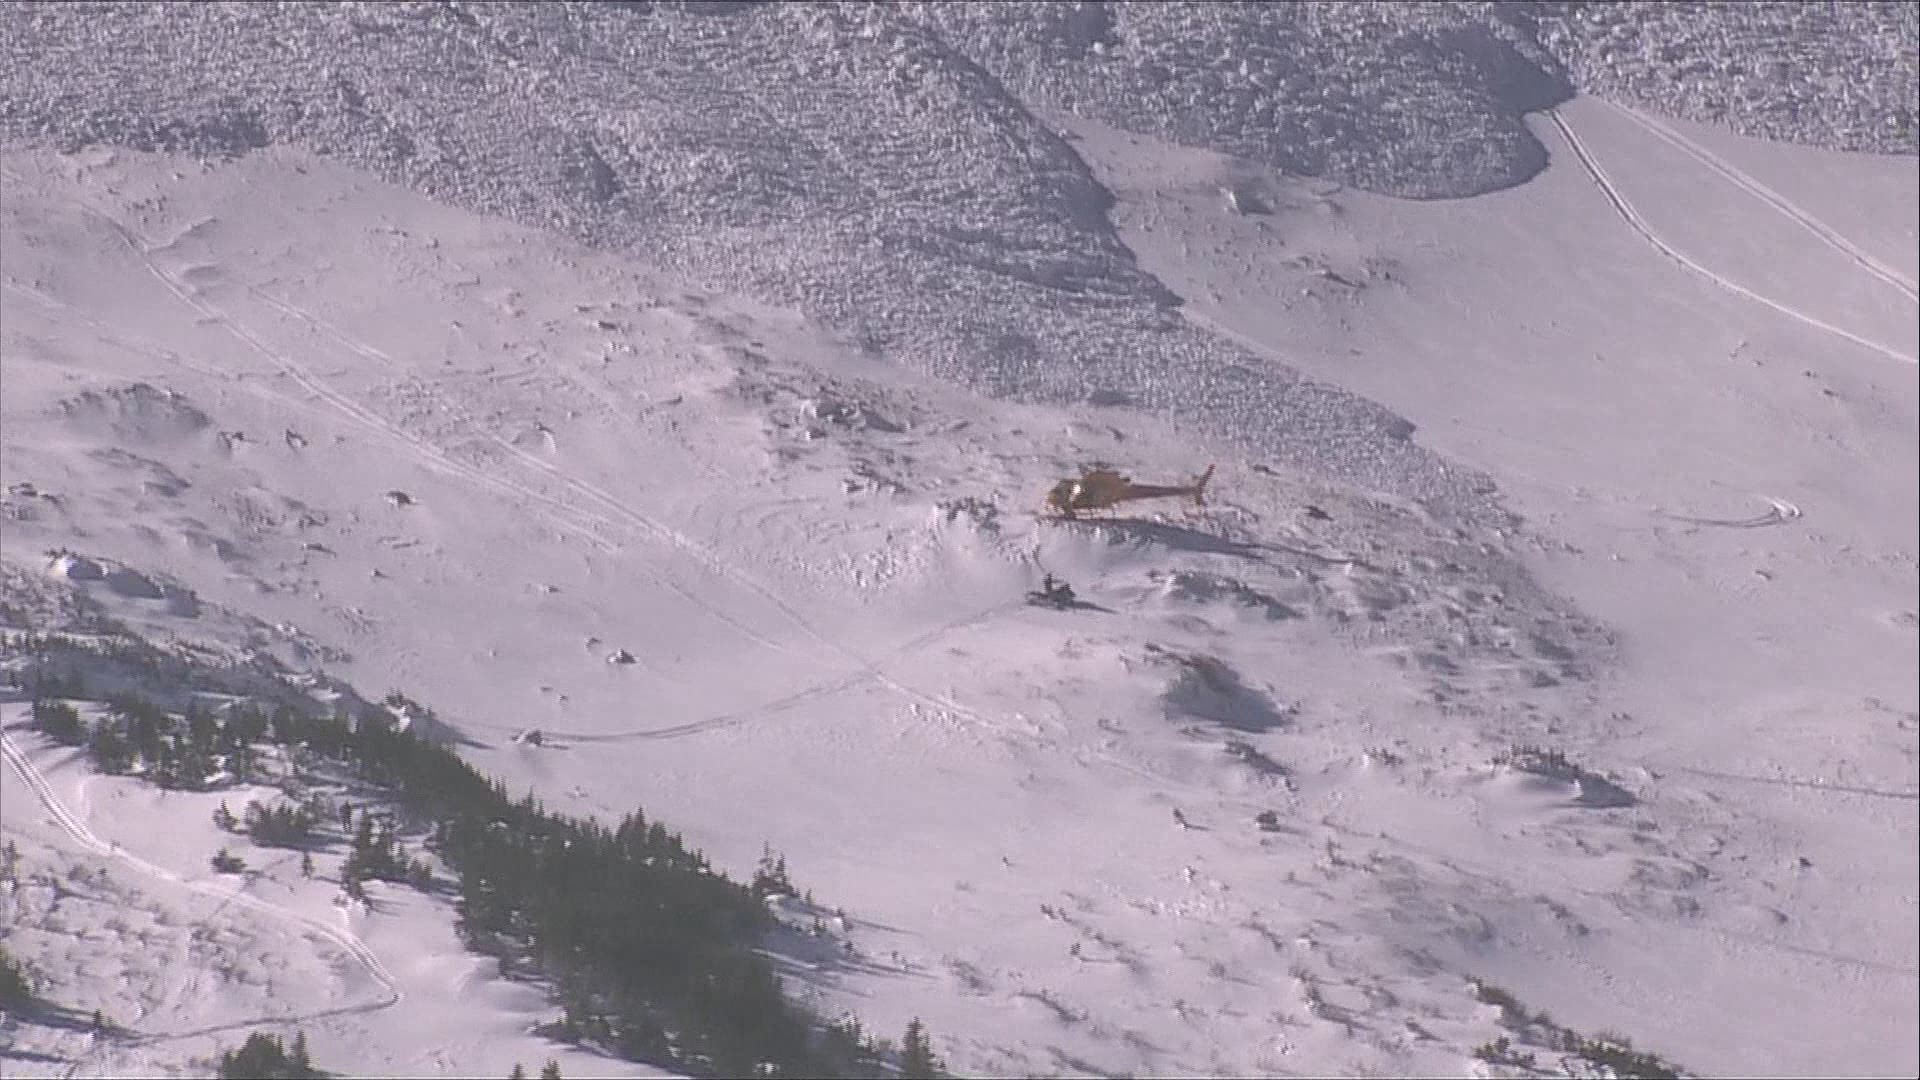 The large avalanche was triggered by a snowmobile. No one was killed or seriously injured, according to the Colorado Avalanche Information Center.